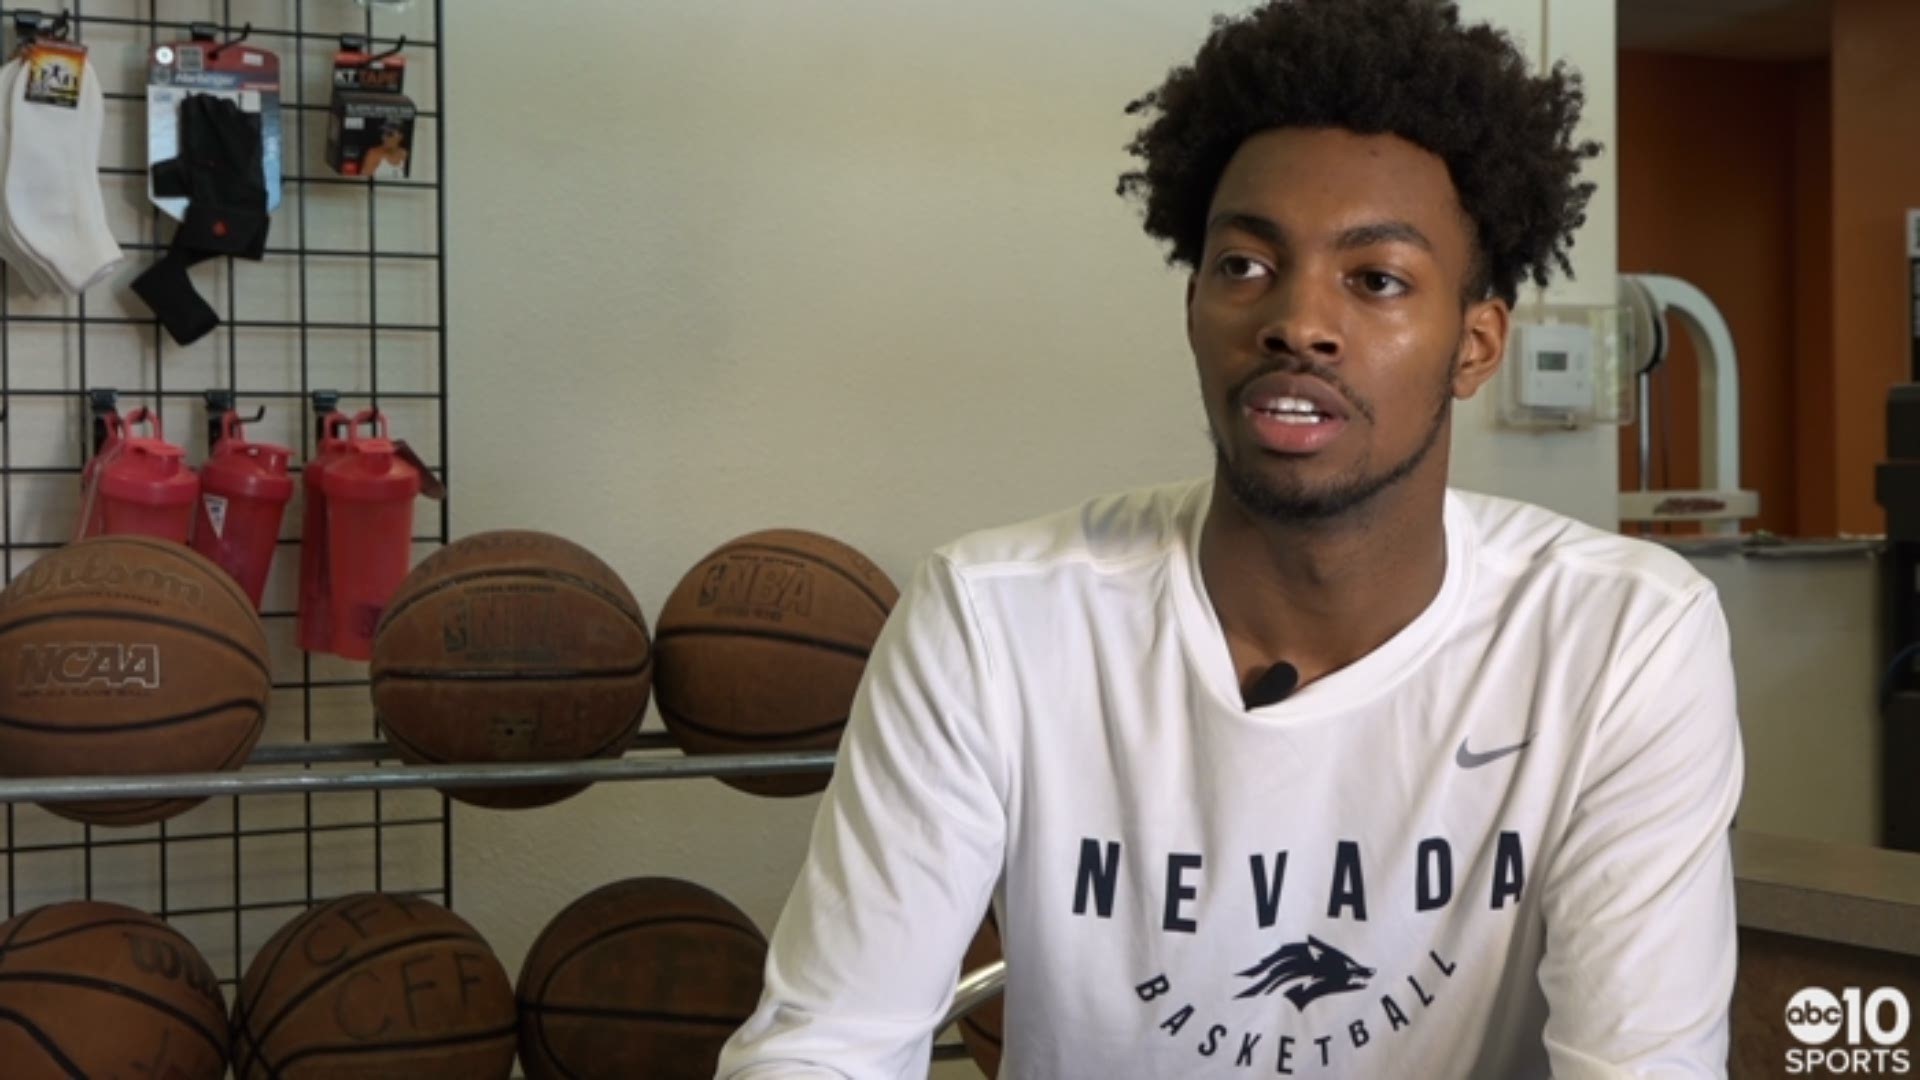 Roseville native Jordan Brown, the former Woodcreek High School star who played at Prolific Prep in Napa and became a McDonald's All-American, sits down with ABC10's Sean Cunningham to discuss his decision to play for the Nevada Wolfpack. His mother Yolanda Brown also talks about the difficult process and having her son play close to home.